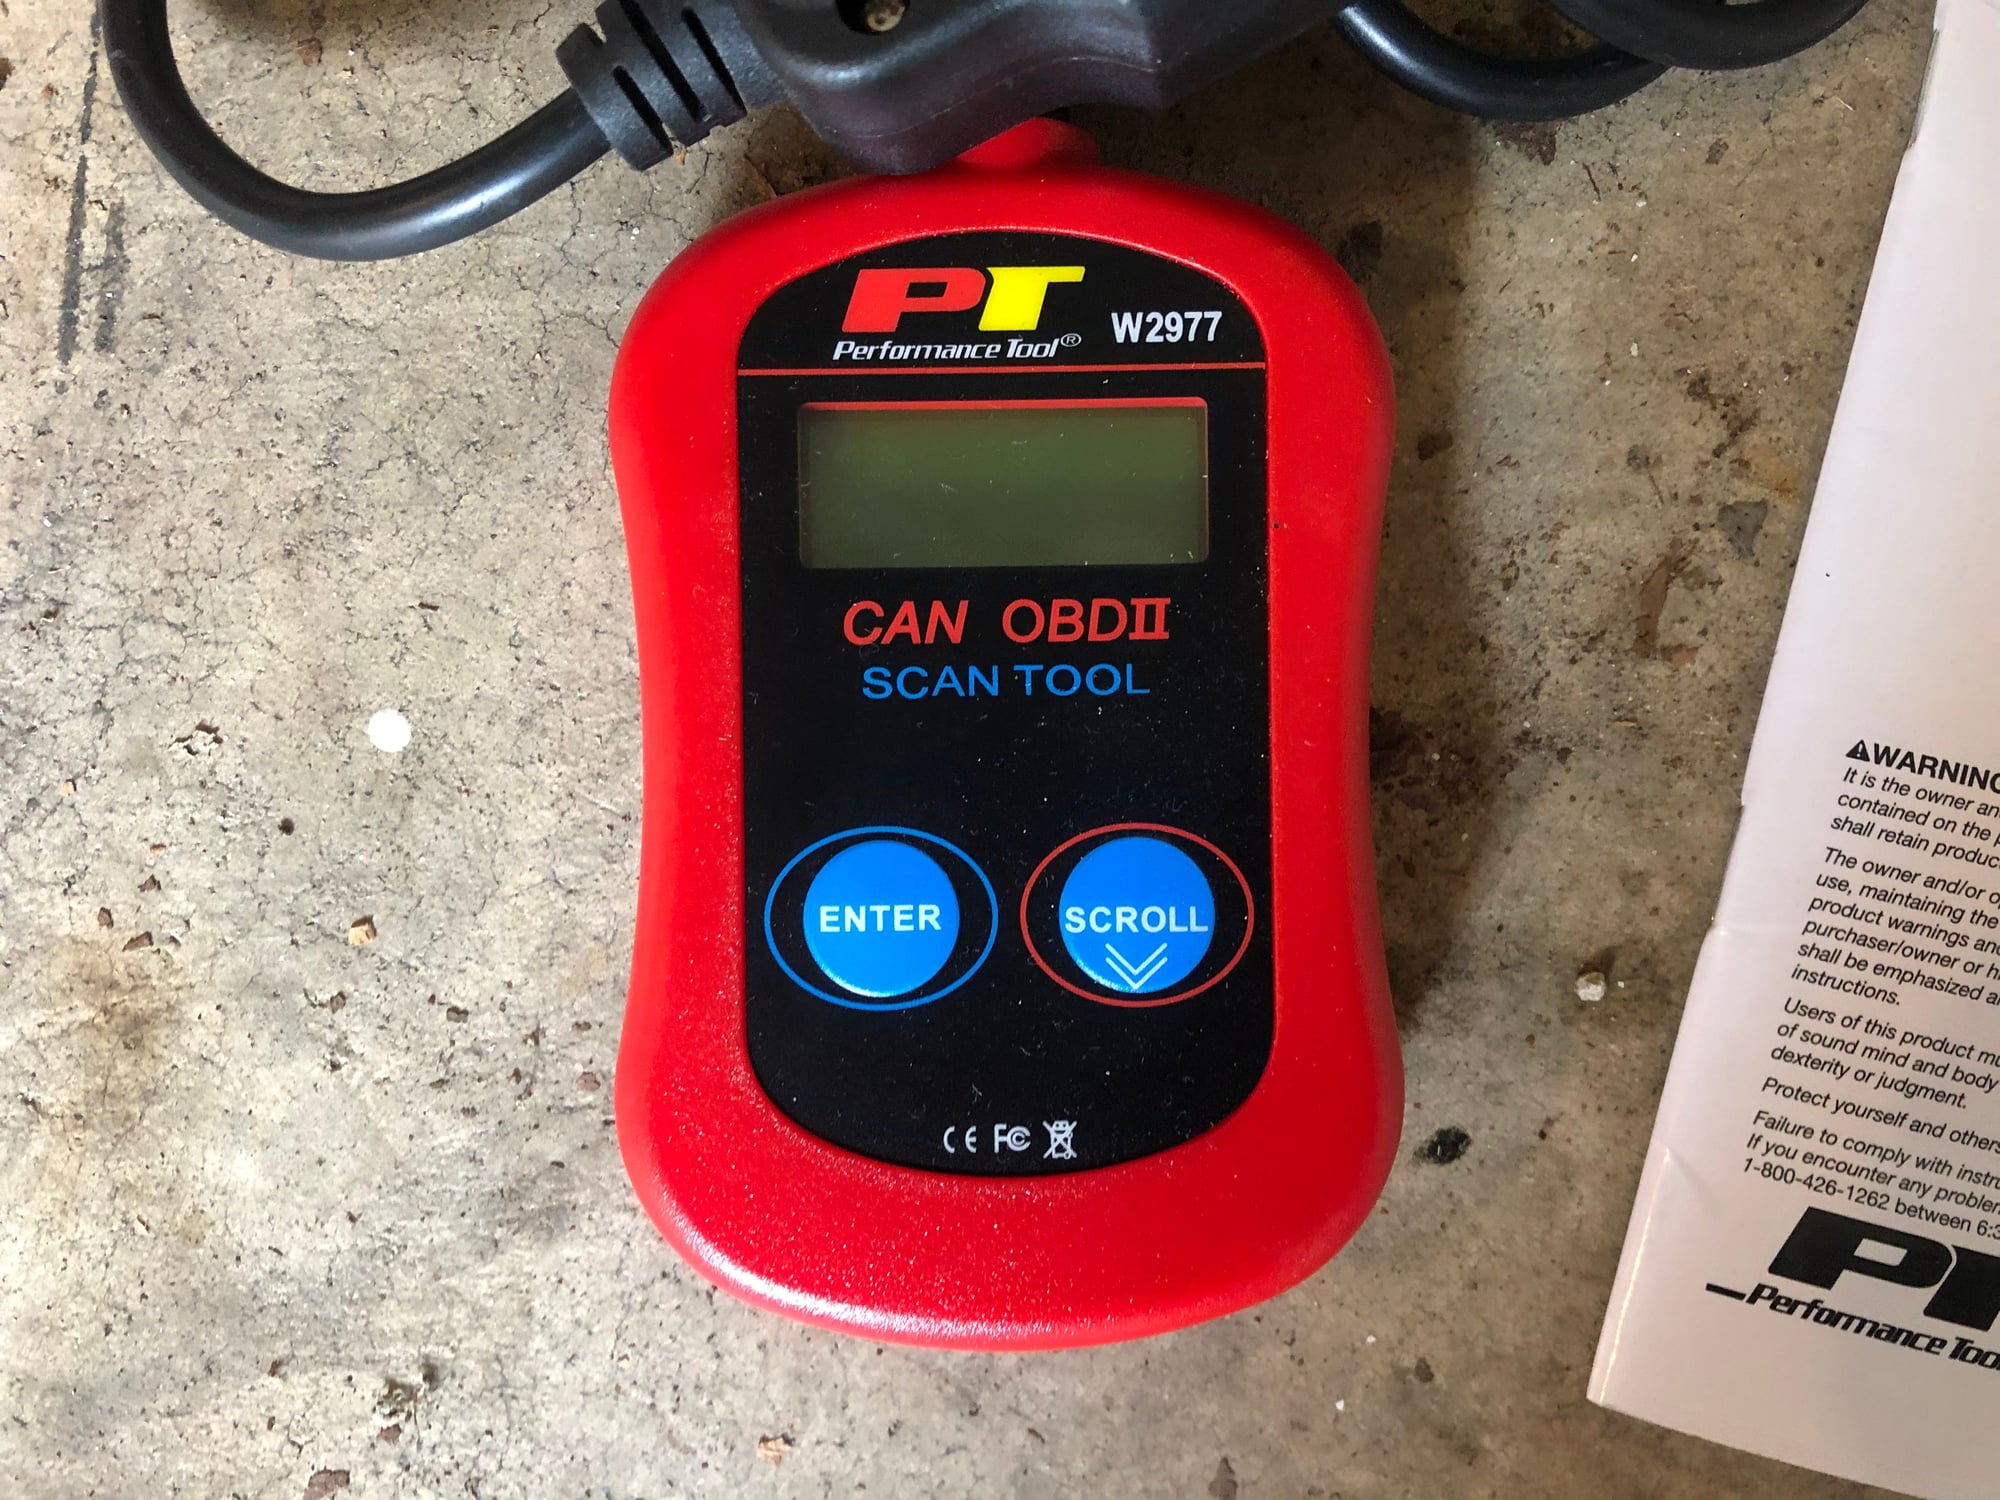 Miscellaneous - OBDII Scan Tool (Used For 2000 Jaguar S-Type) - Used - 2000 to 2020 Jaguar All Models - Dallas, TX 75206, United States